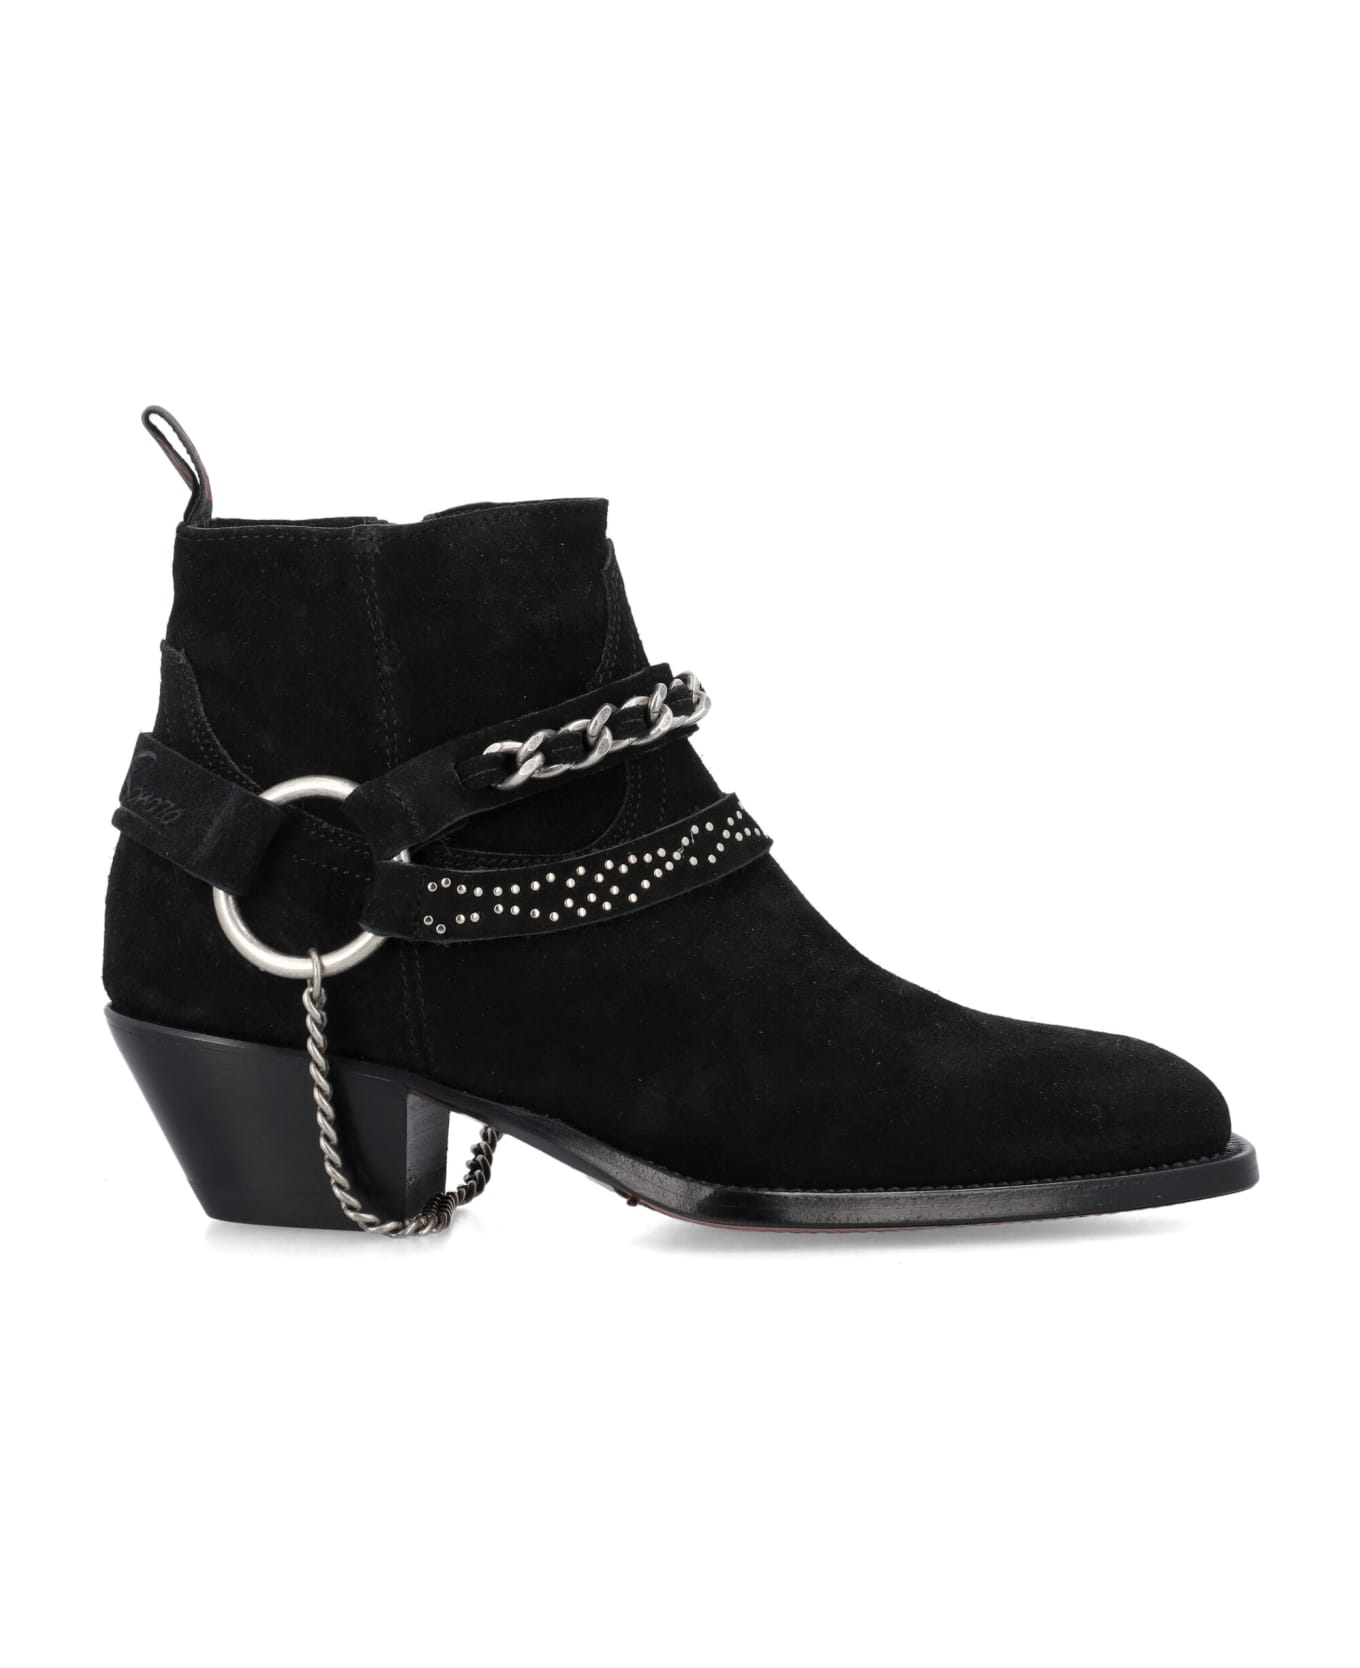 Sonora Dulce Belt Ankle Boots - BLACK ブーツ